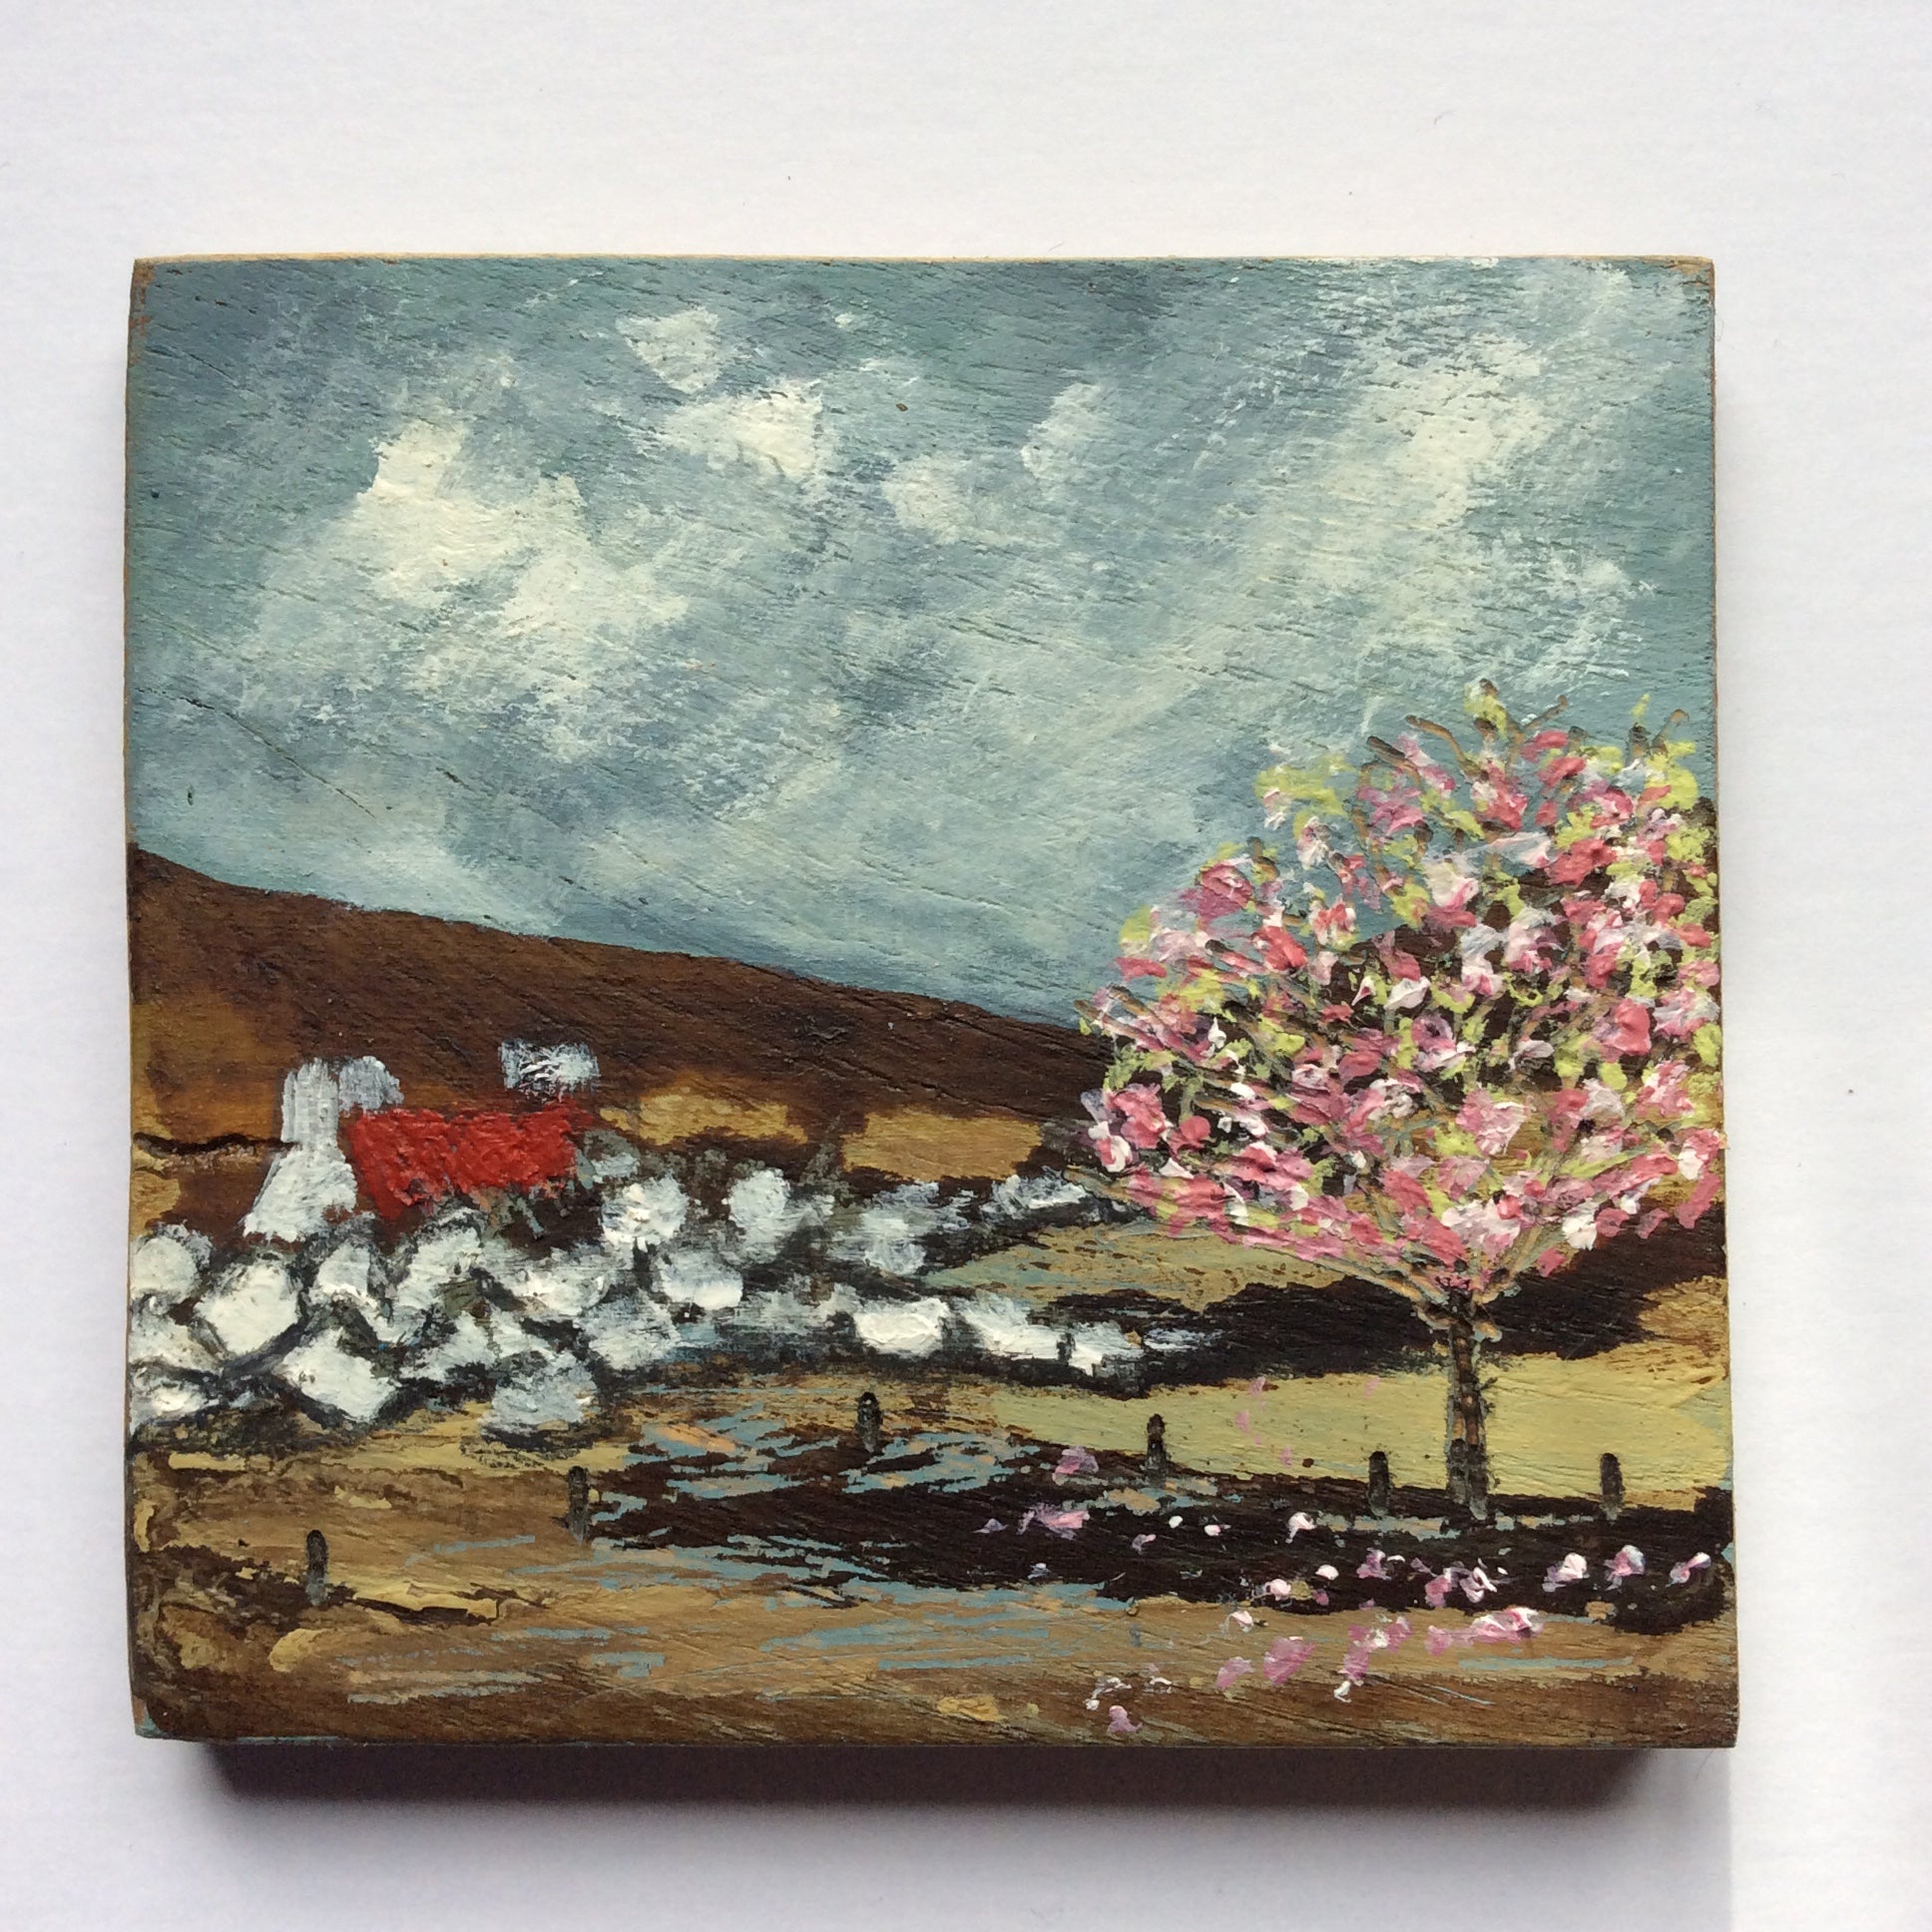 Mini Mixed Media Art on wood By Louise O'Hara - "The old white washed wall"